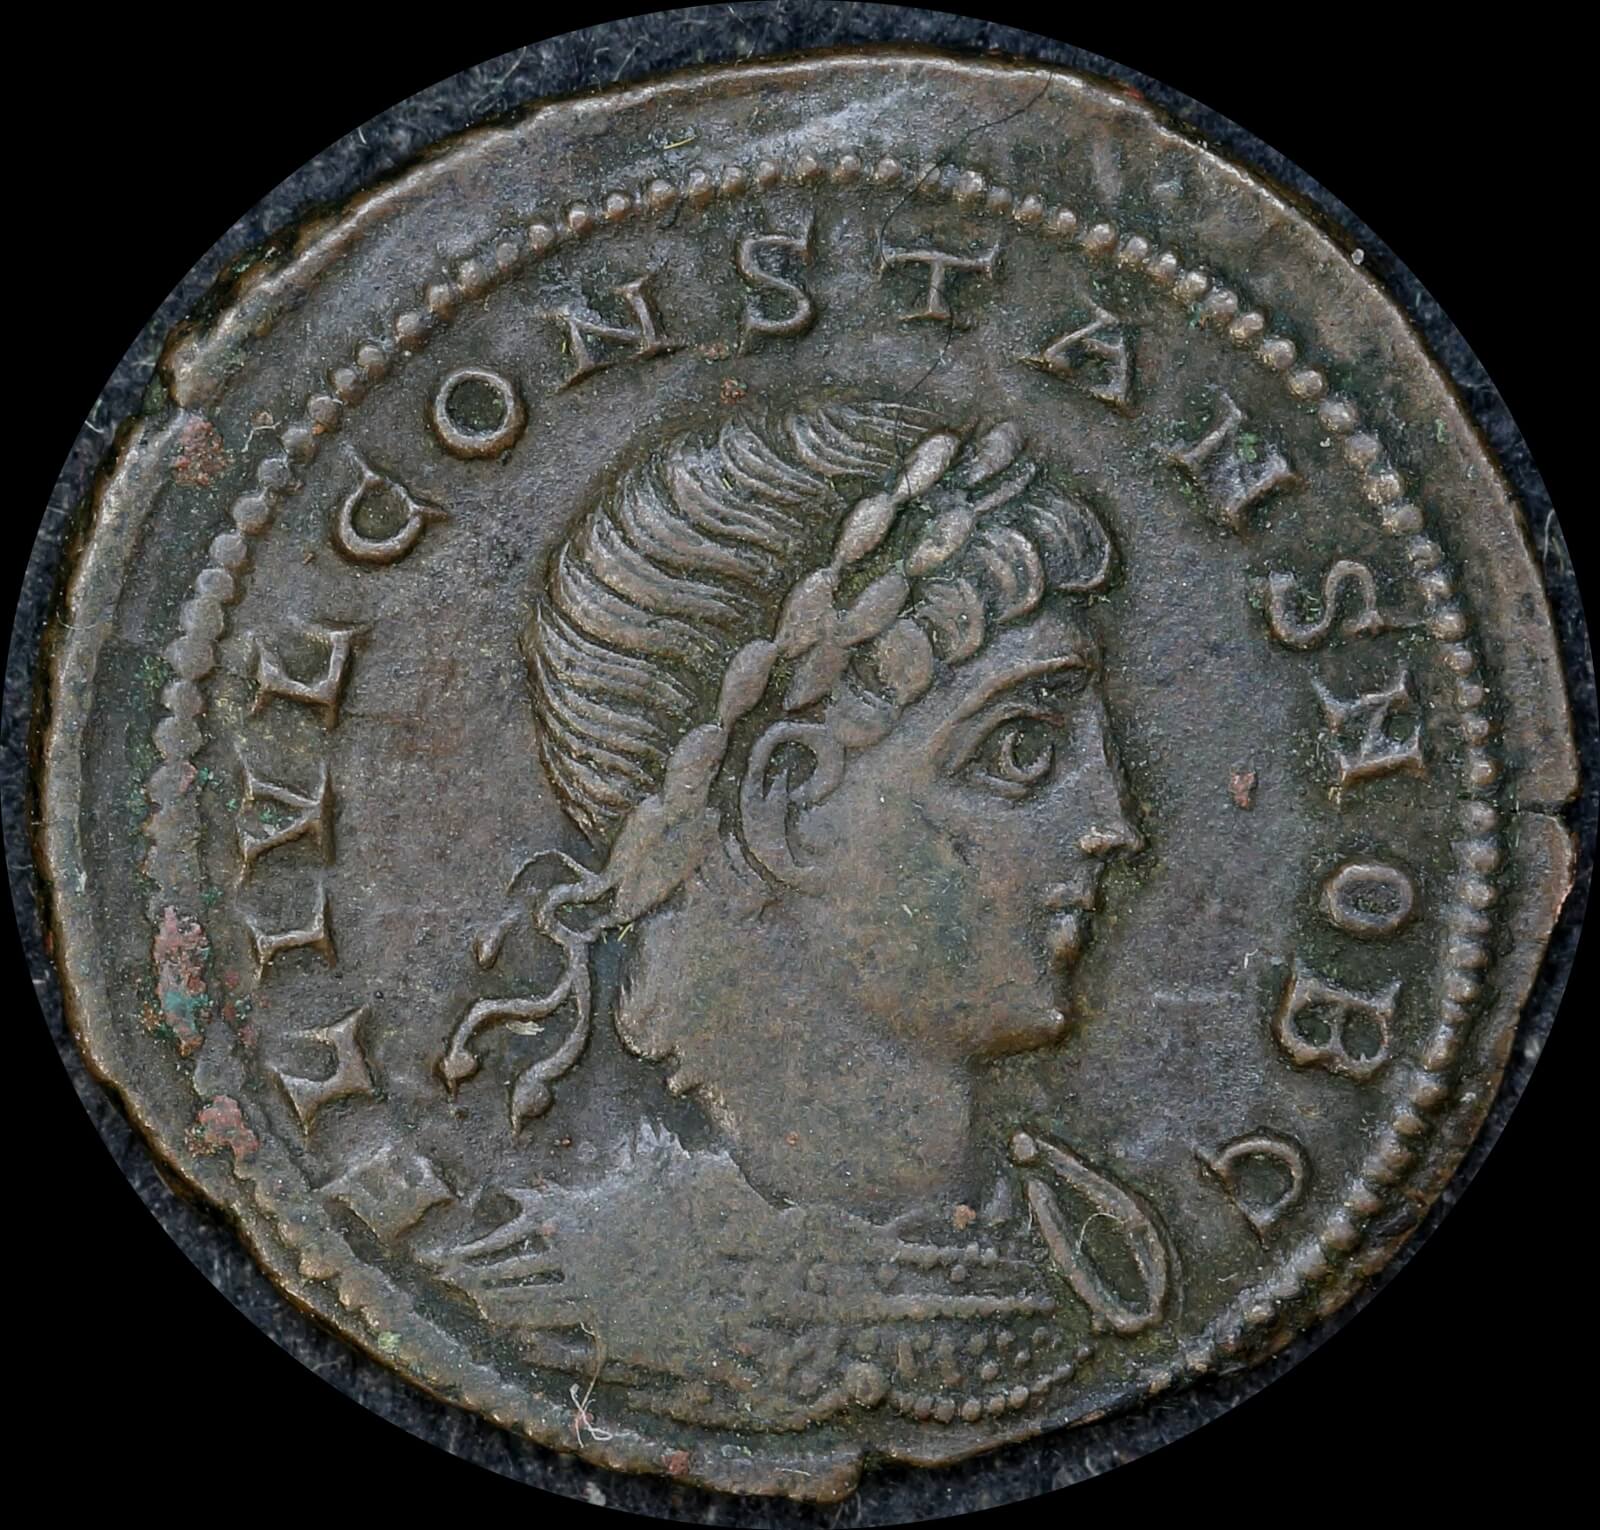 Ancient Rome (Imperial) 335 AD Constans AE Follis Soldiers with standard RIC VII A89 good VF product image